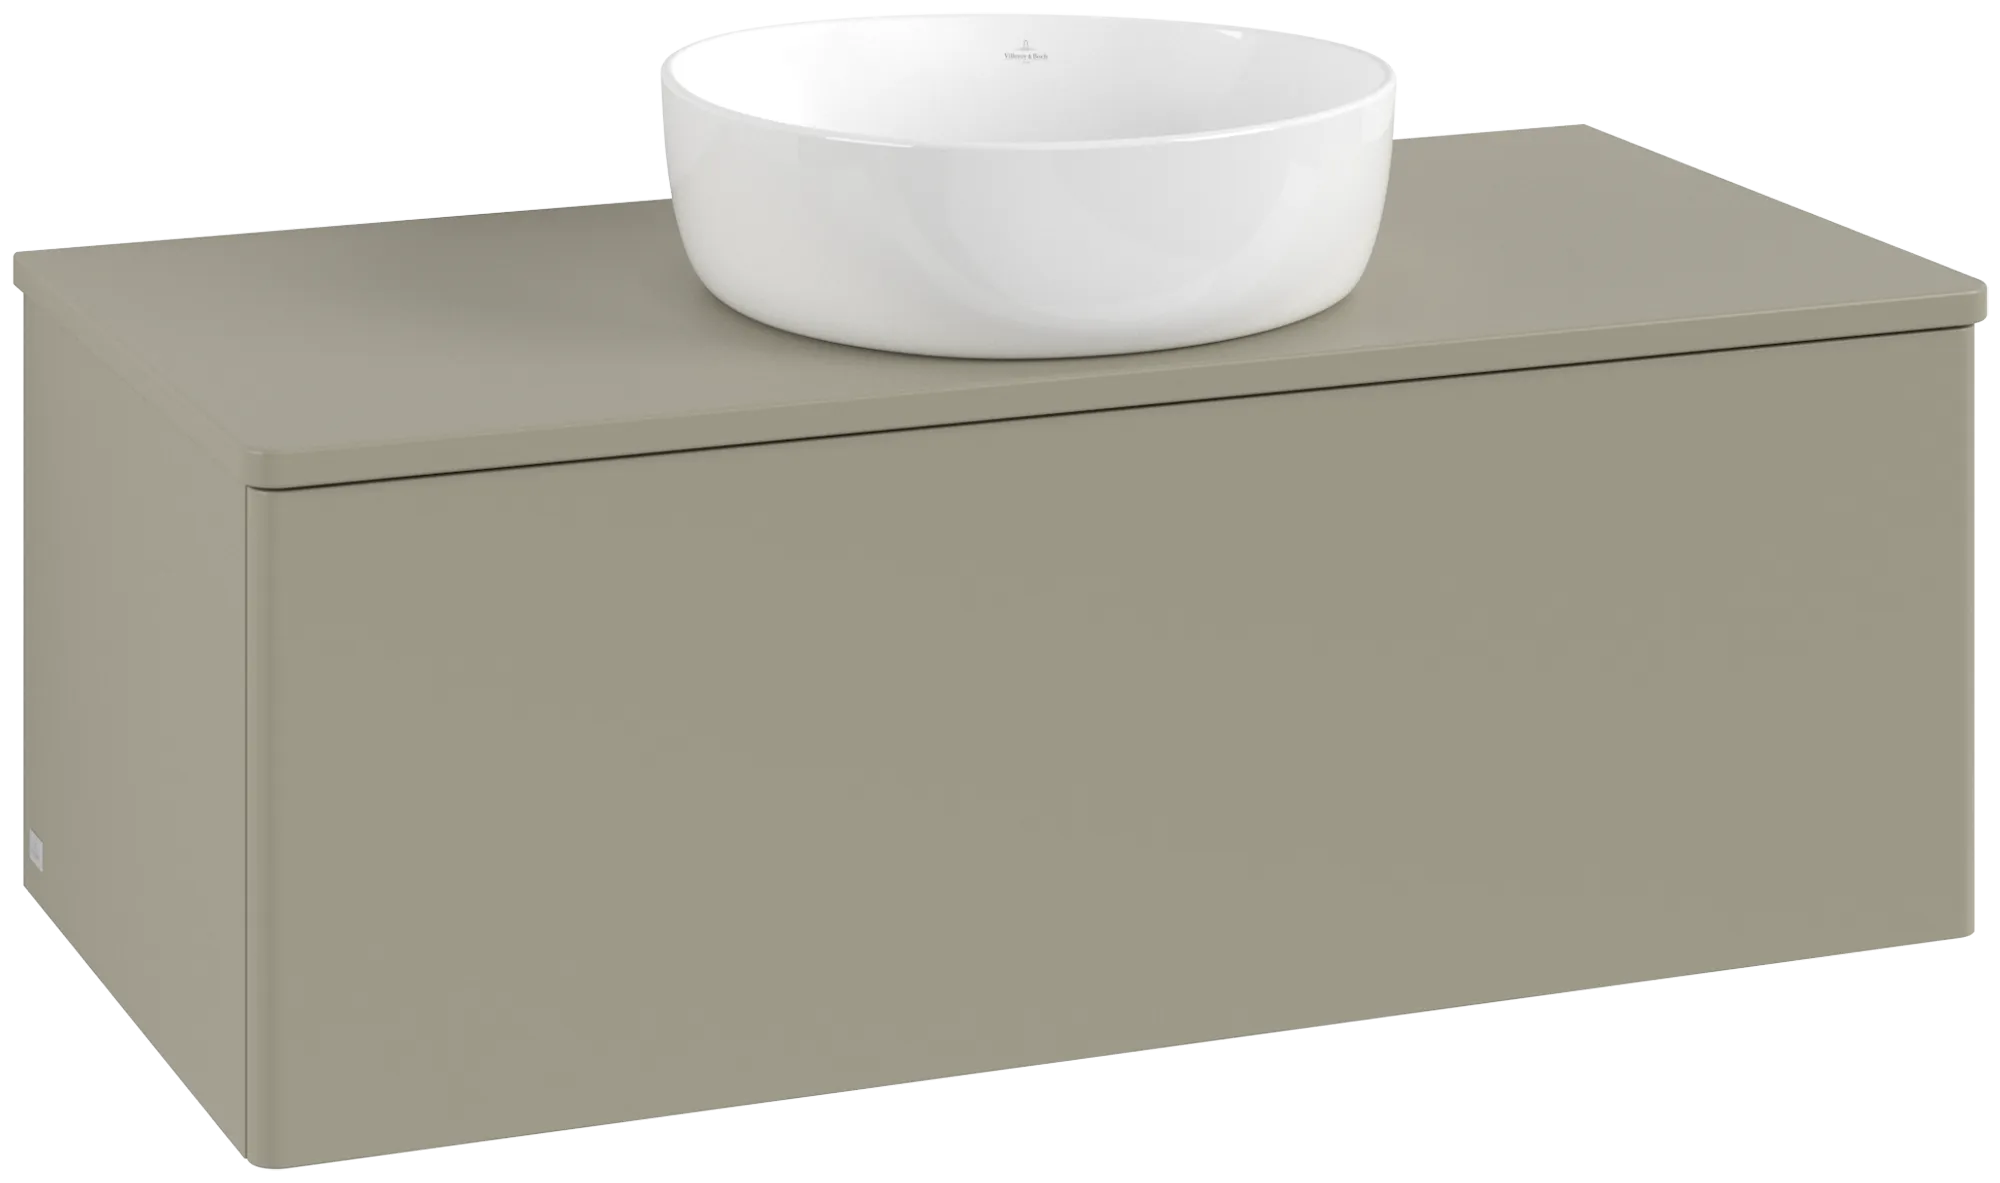 Obrázek VILLEROY BOCH Antao Vanity unit, 1 pull-out compartment, 1000 x 360 x 500 mm, Front without structure, Stone Grey Matt Lacquer / Stone Grey Matt Lacquer #K31010HK